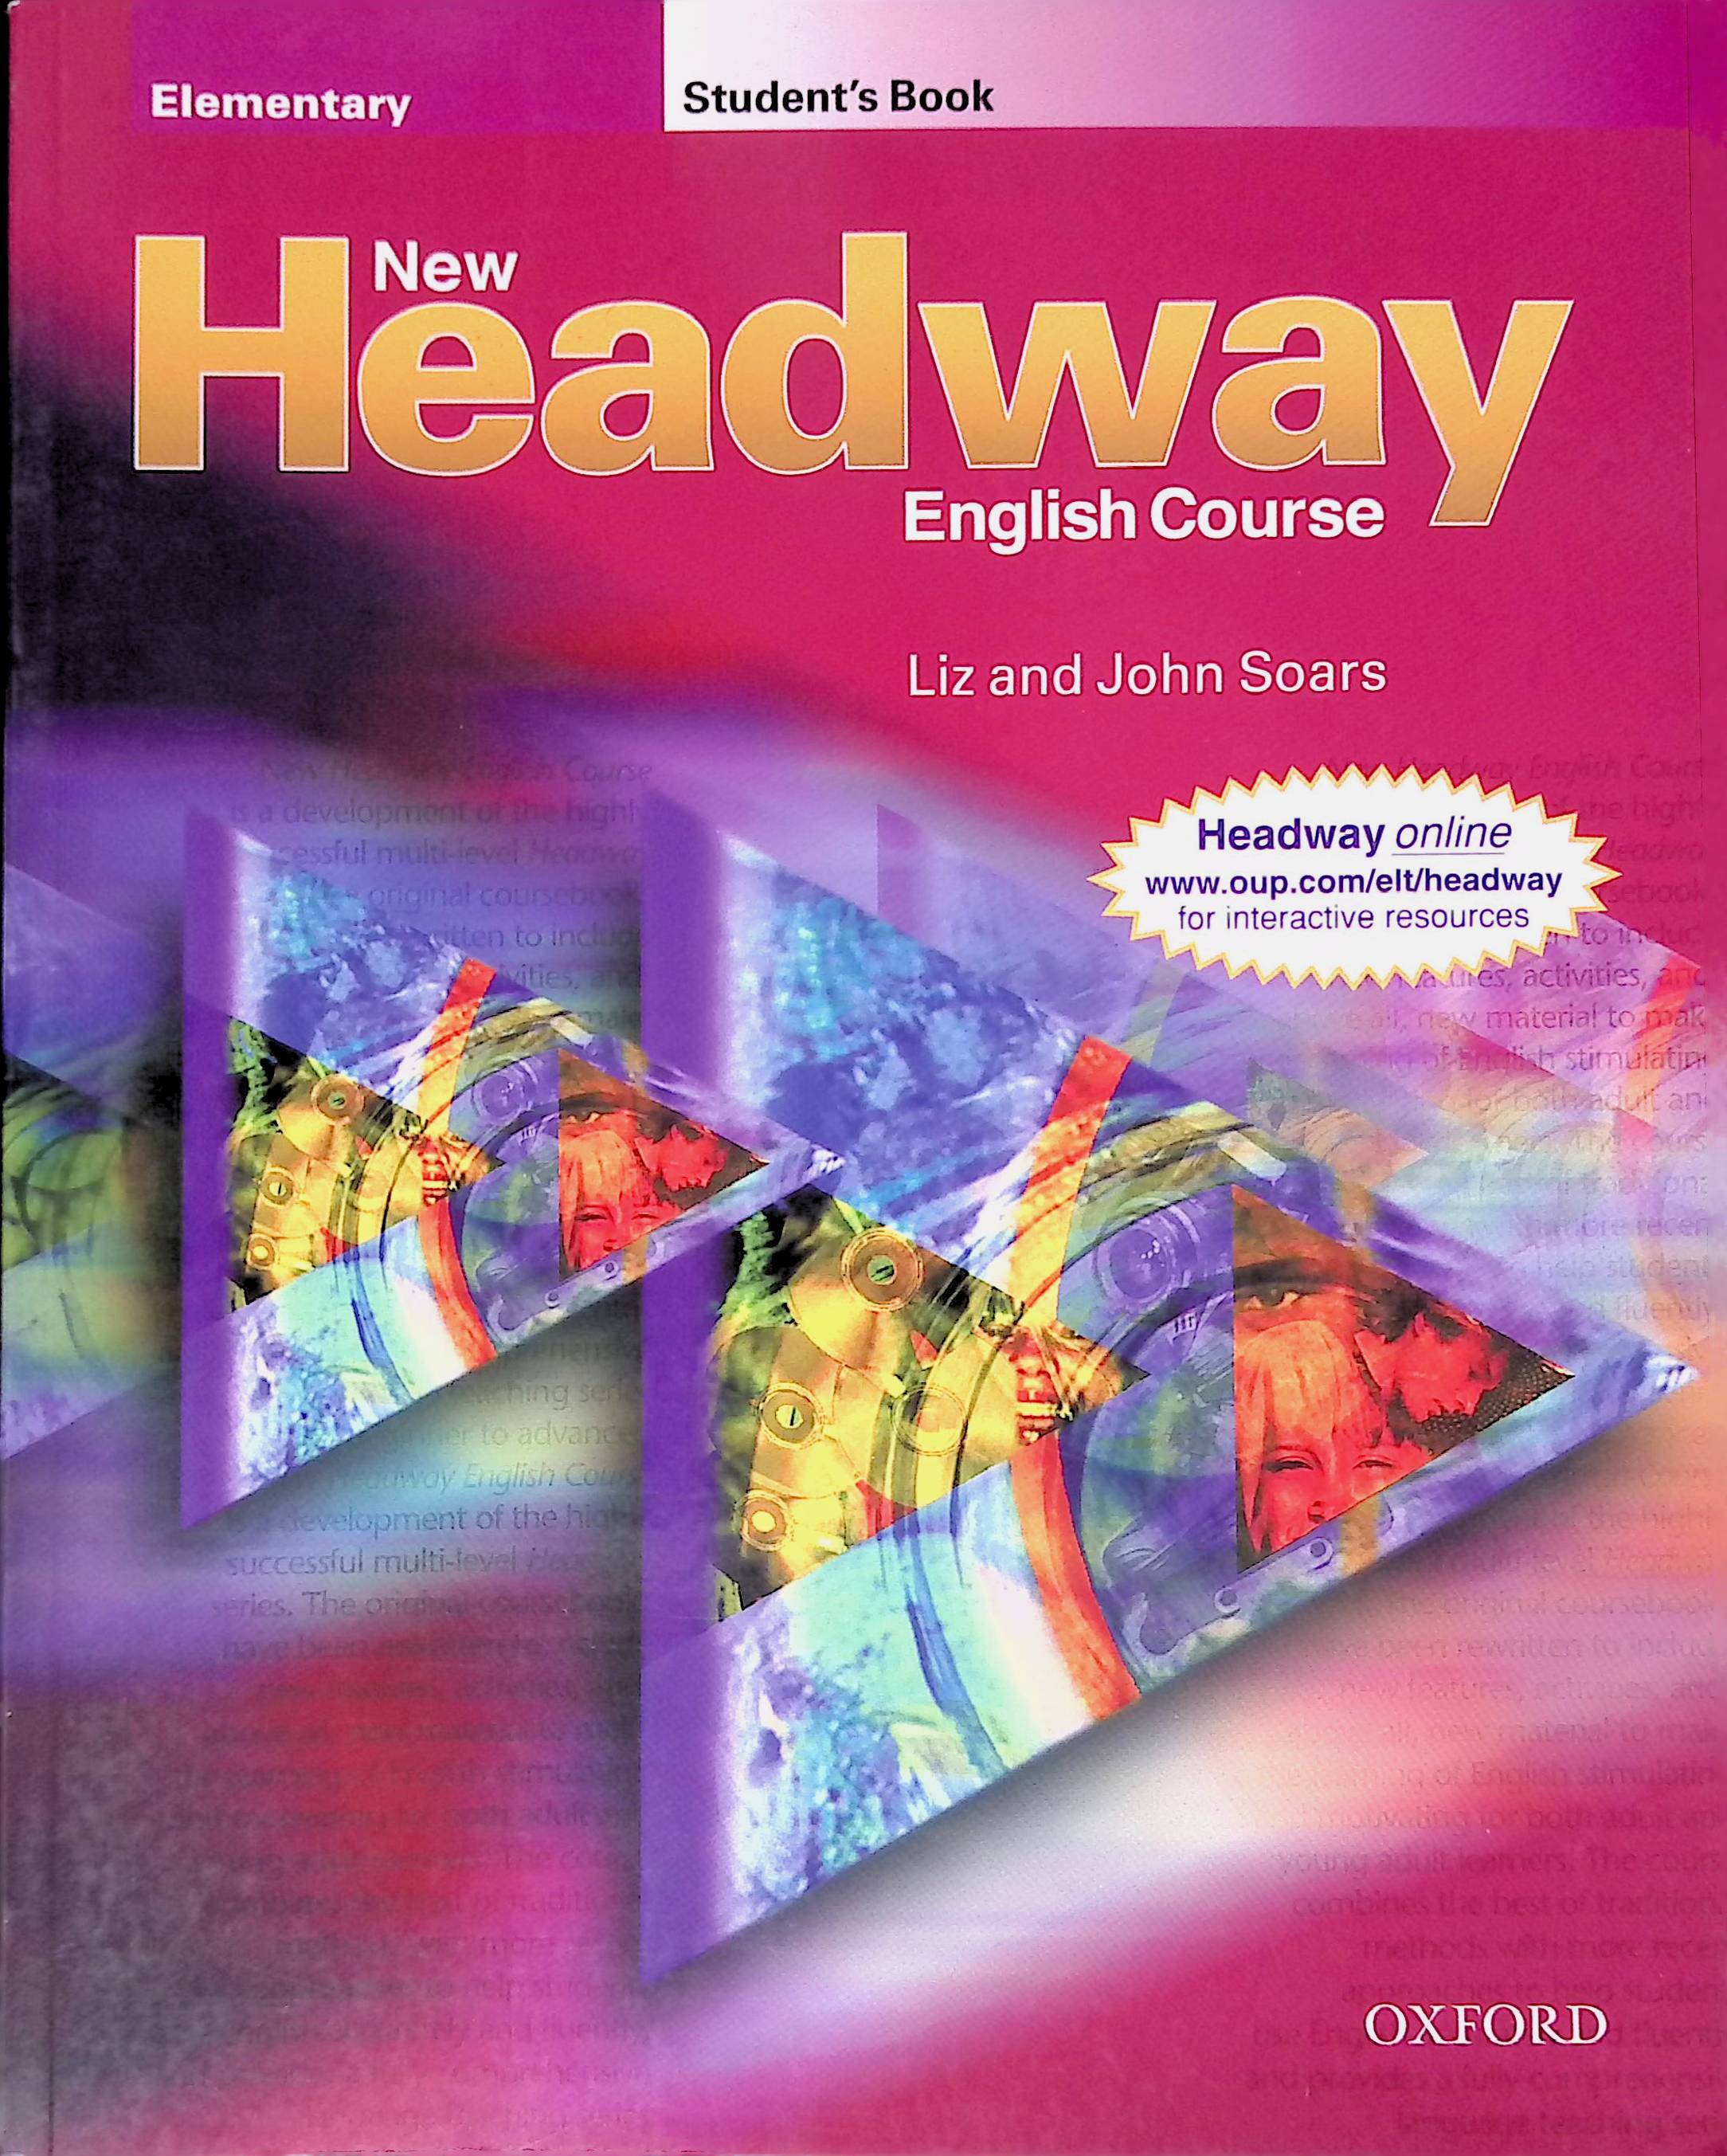 Elementary students book учебник. New Headway. English course. Elementary. Student's book. Учебник английский Headway John and Lis Soars Oxford. Headway Elementary 5th Edition. New Headway English course 2 издание.